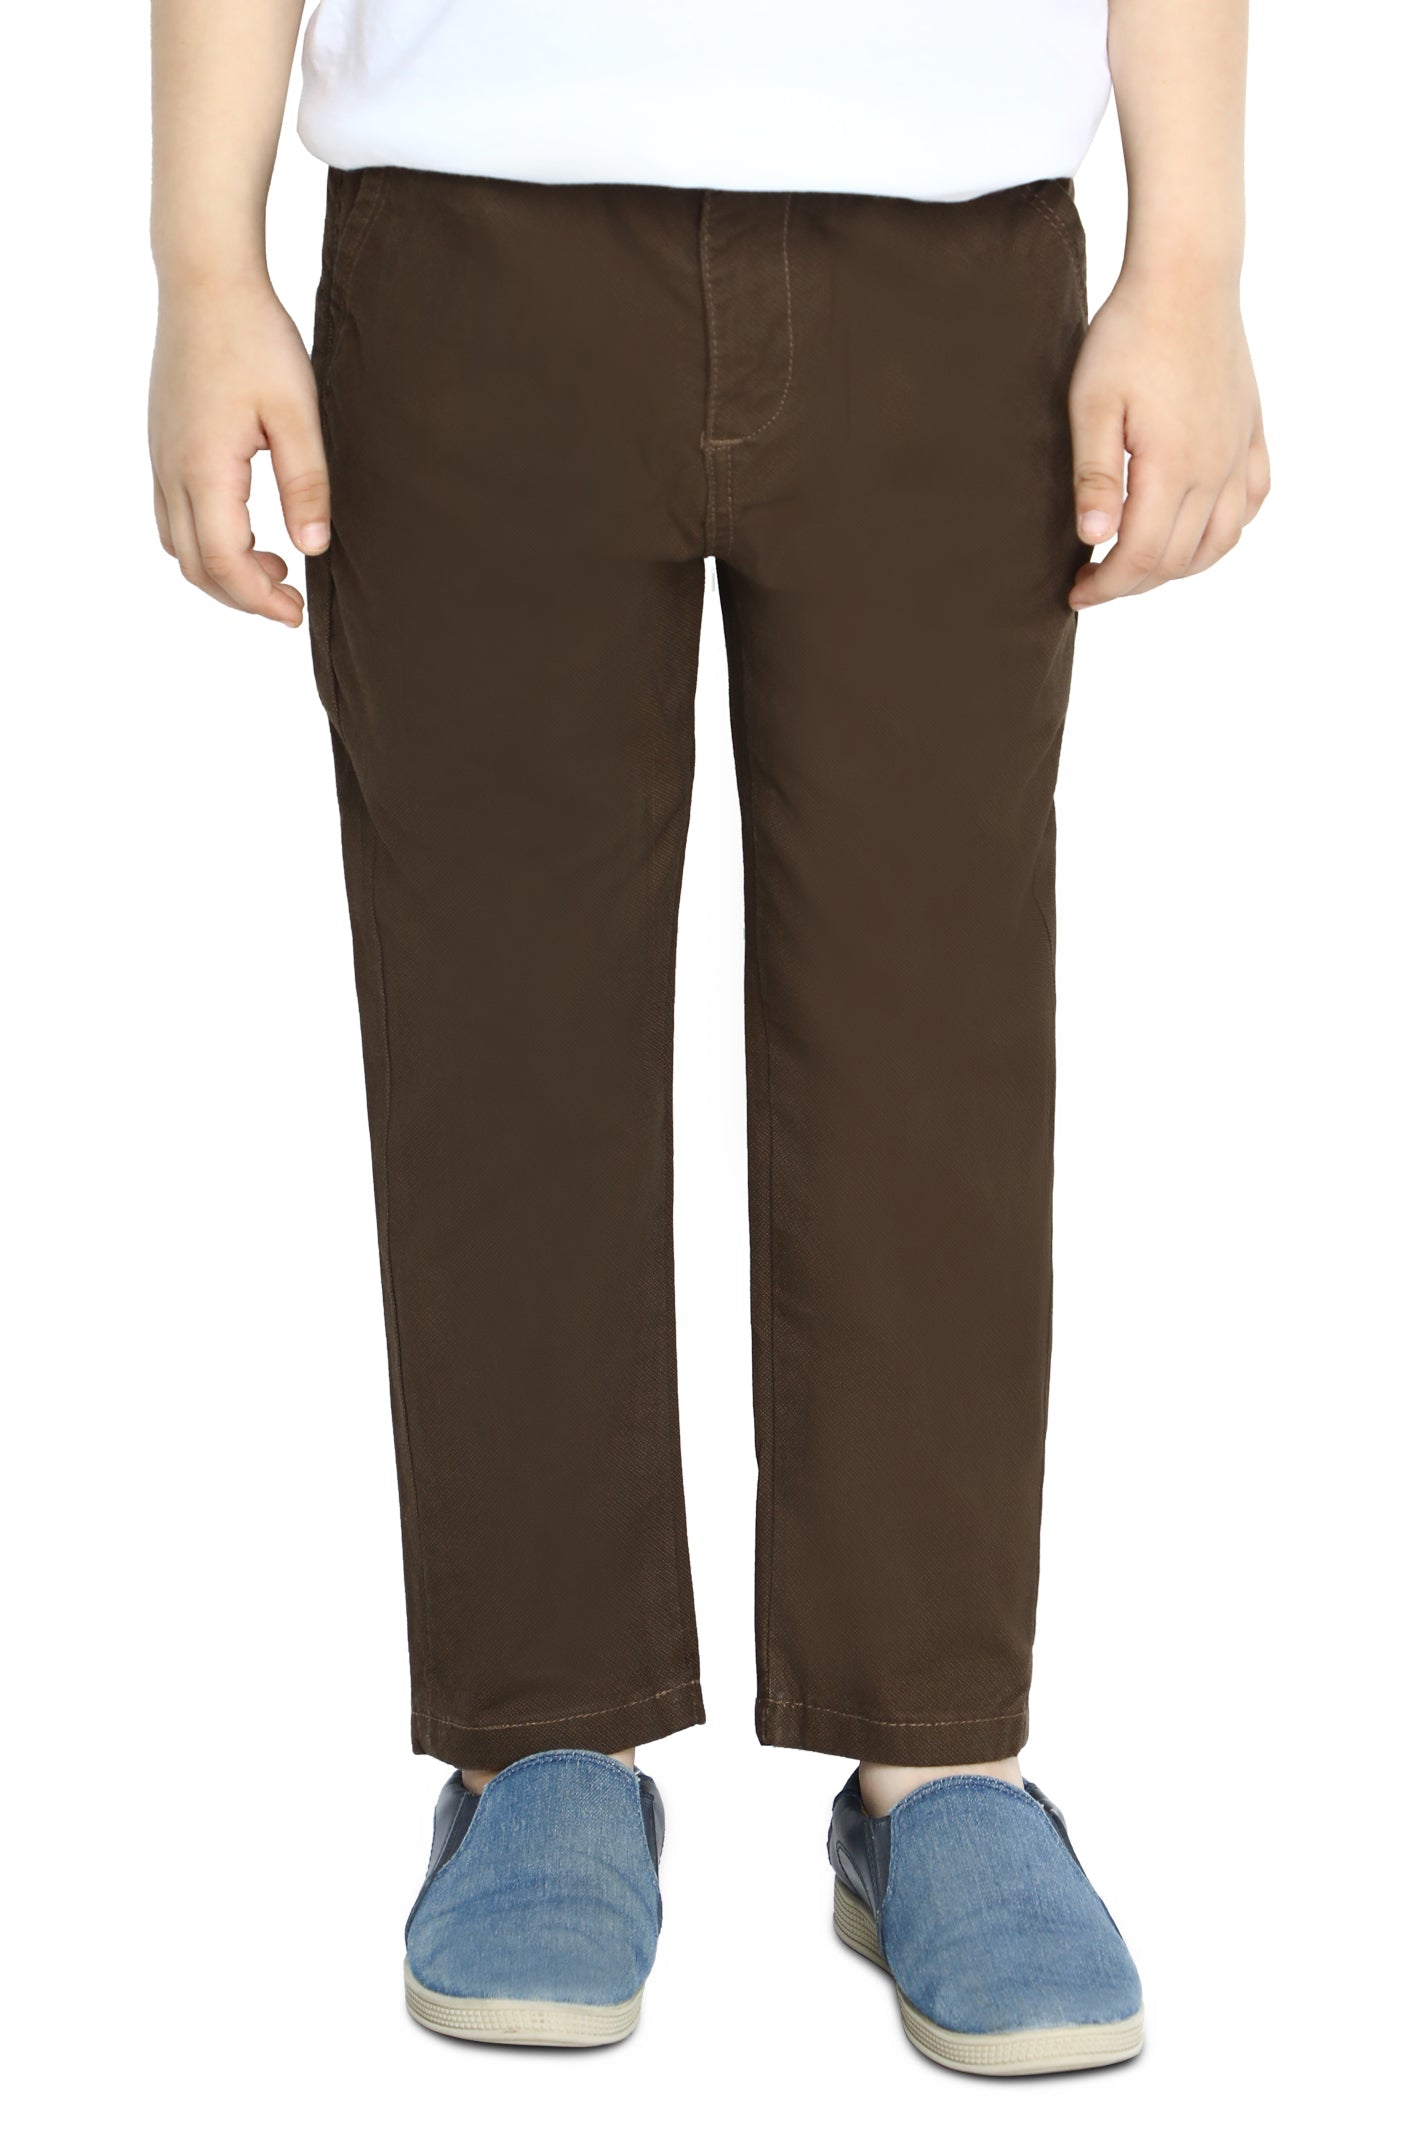 Boys Toddler Trouser SKU: IBC-0010-STONE - Diners